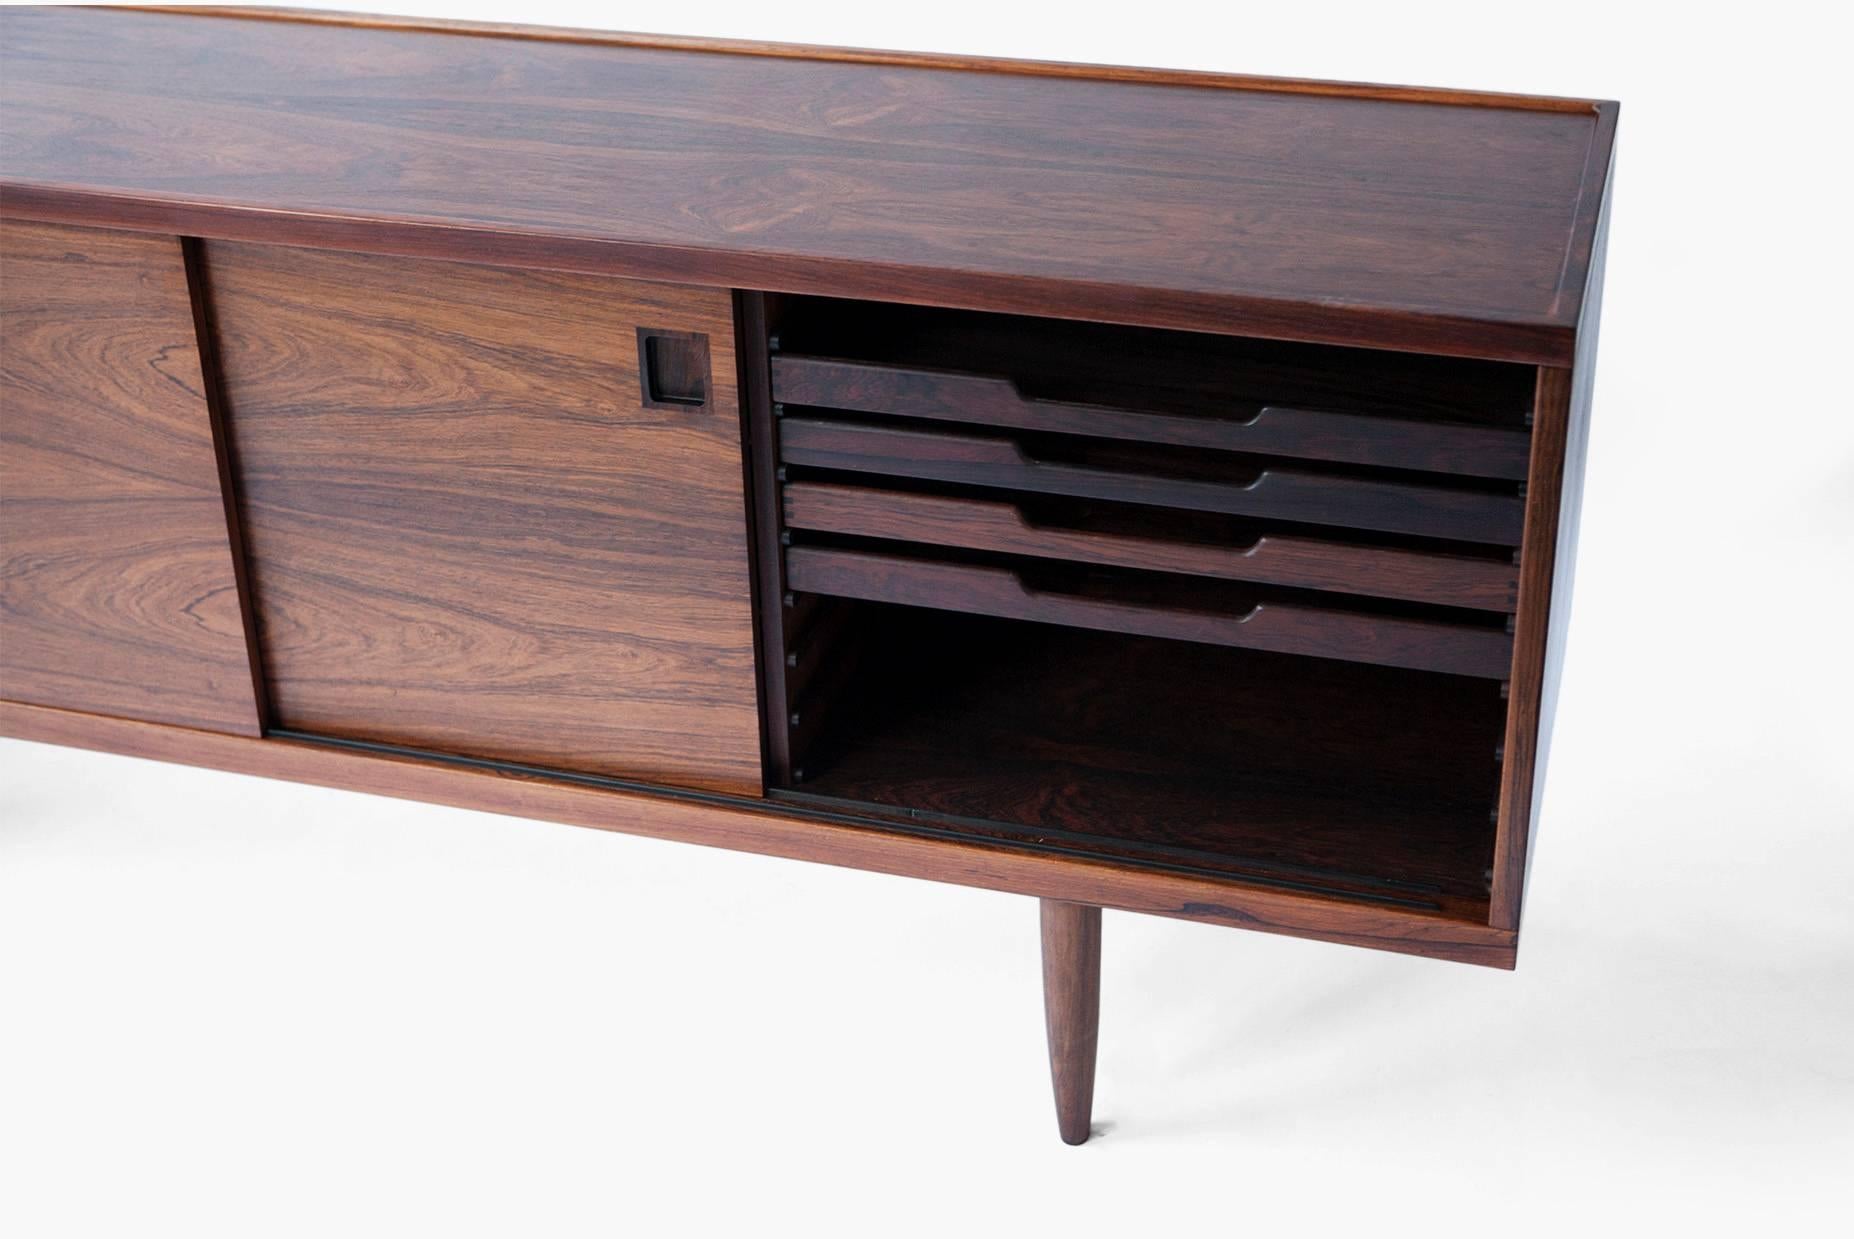 Rosewood sideboard designed to complement Moller's range of dining chairs and tables. Produced by J.L. Mollers Mobelfabrik. Rosewood inlays and solid pull-out drawers.